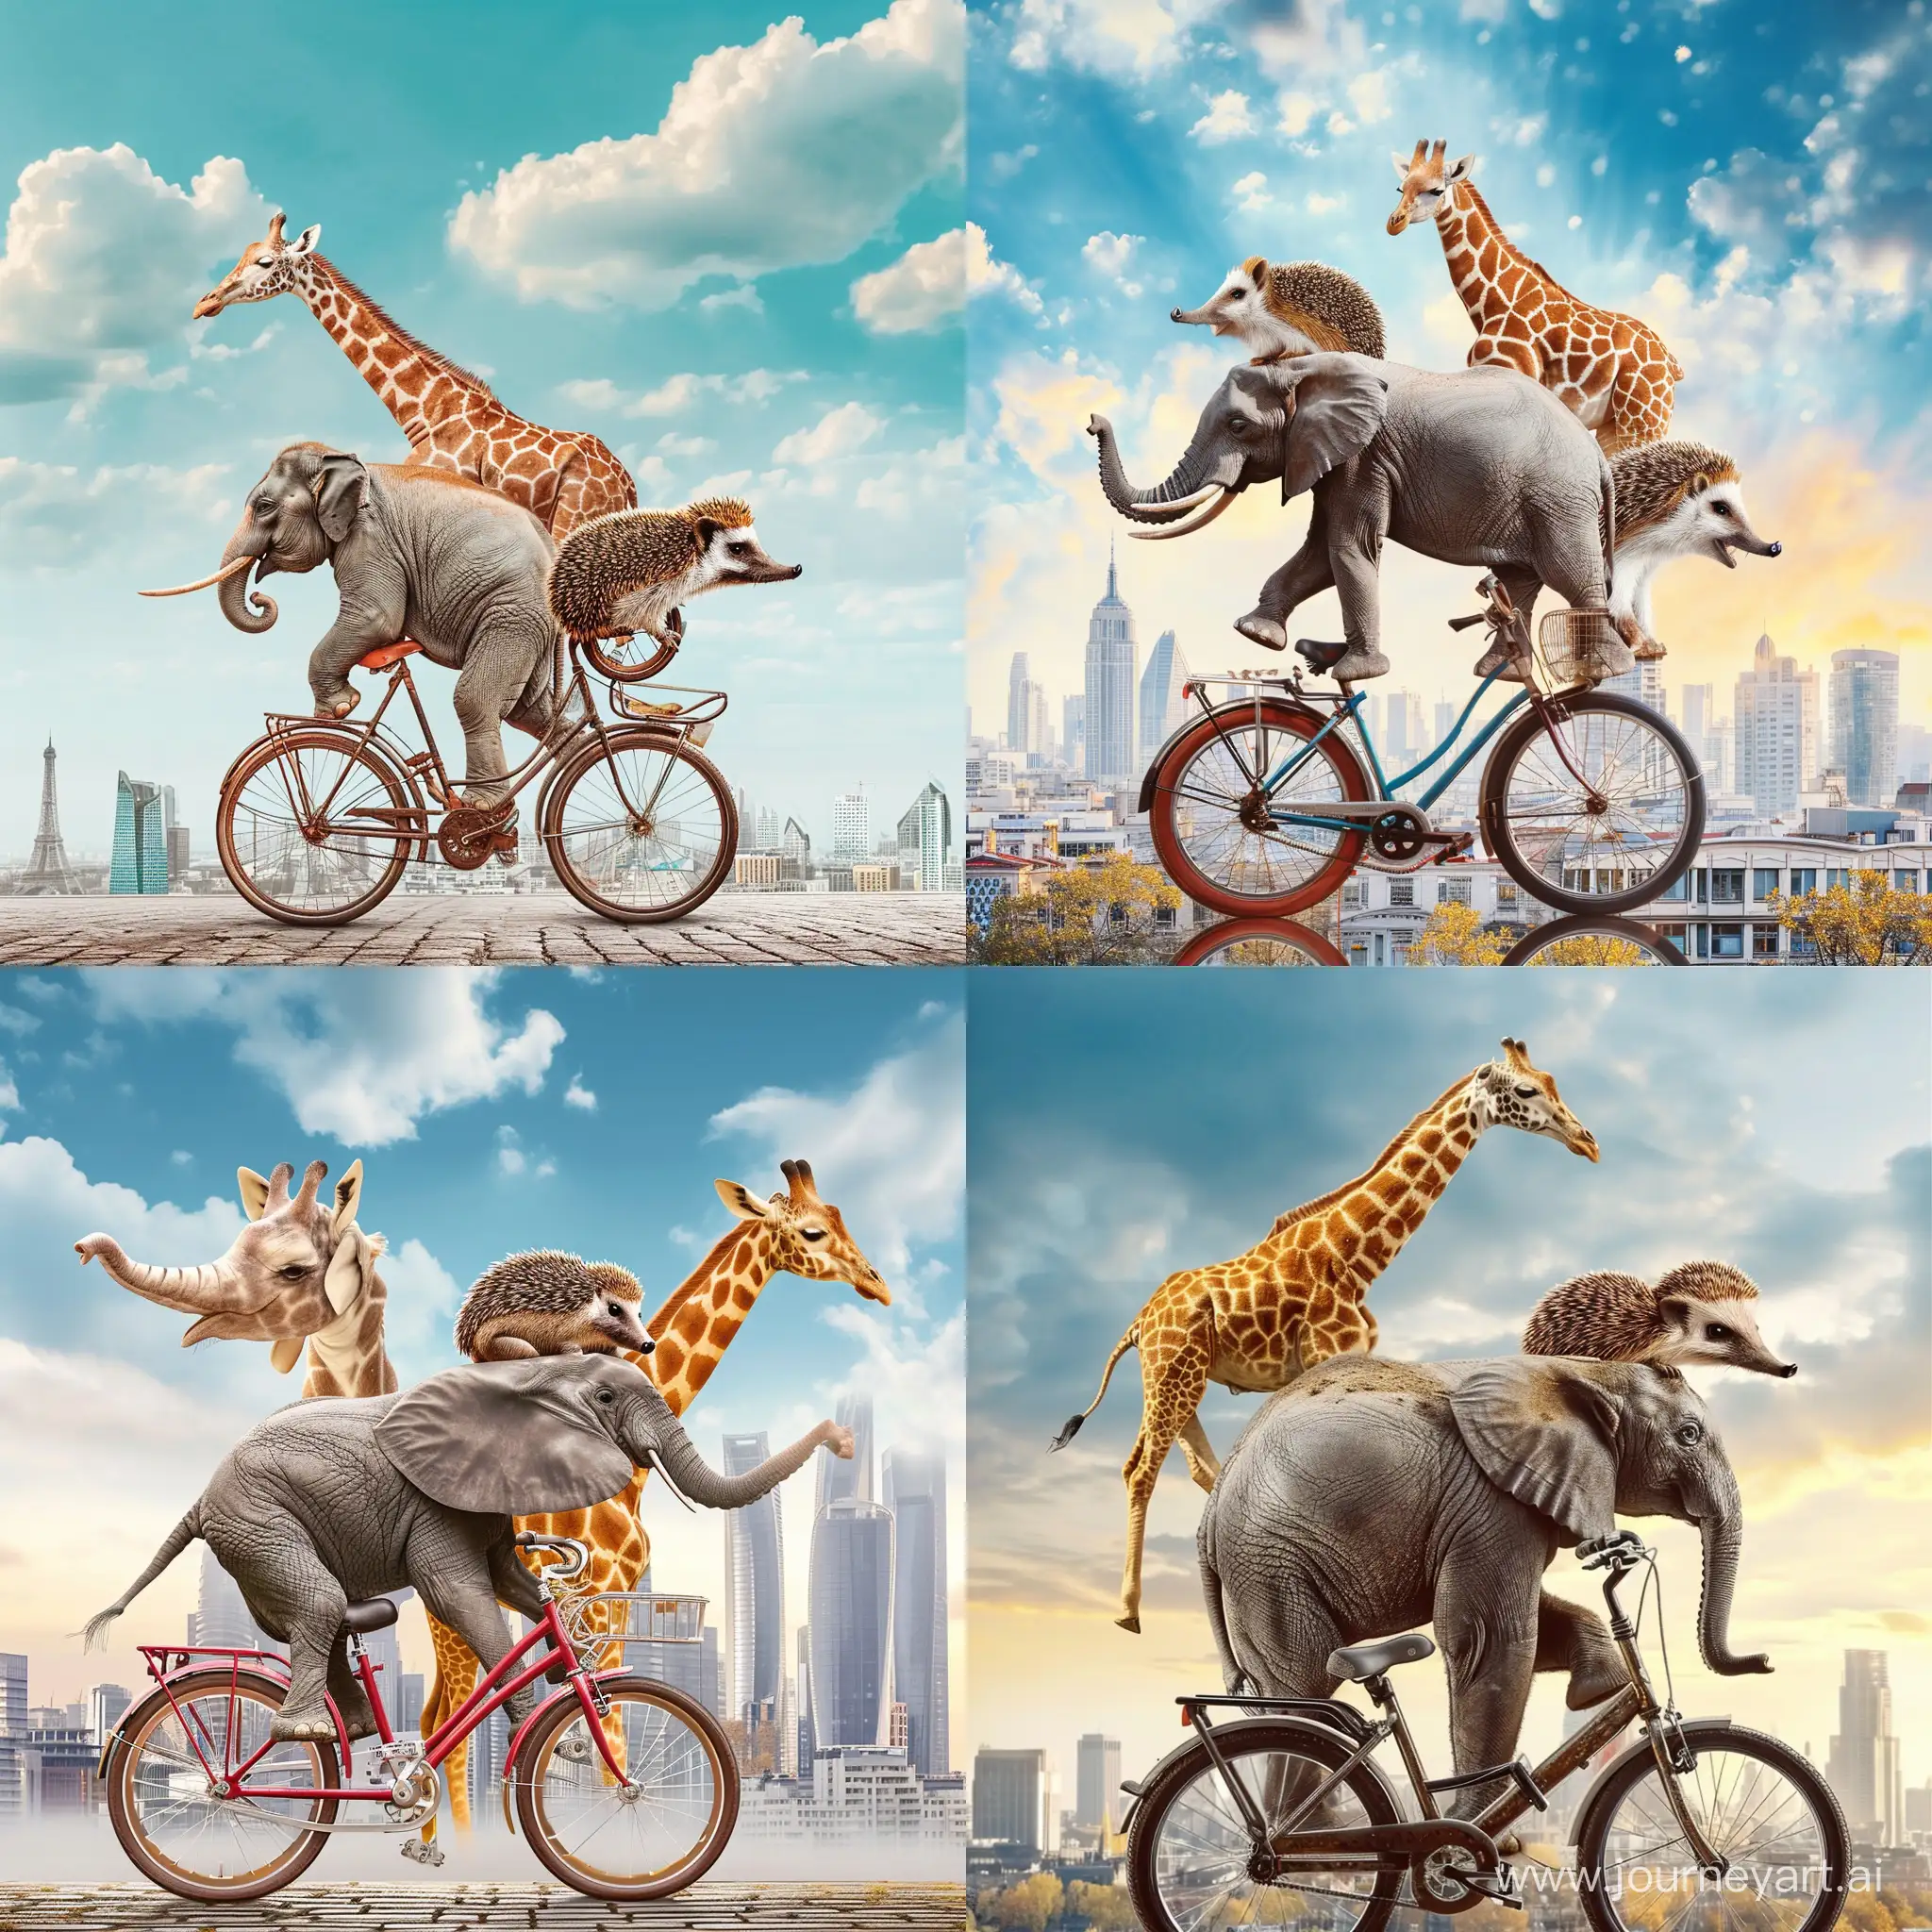 Whimsical-Cityscape-Elephant-Giraffe-and-Hedgehog-on-a-Bicycle